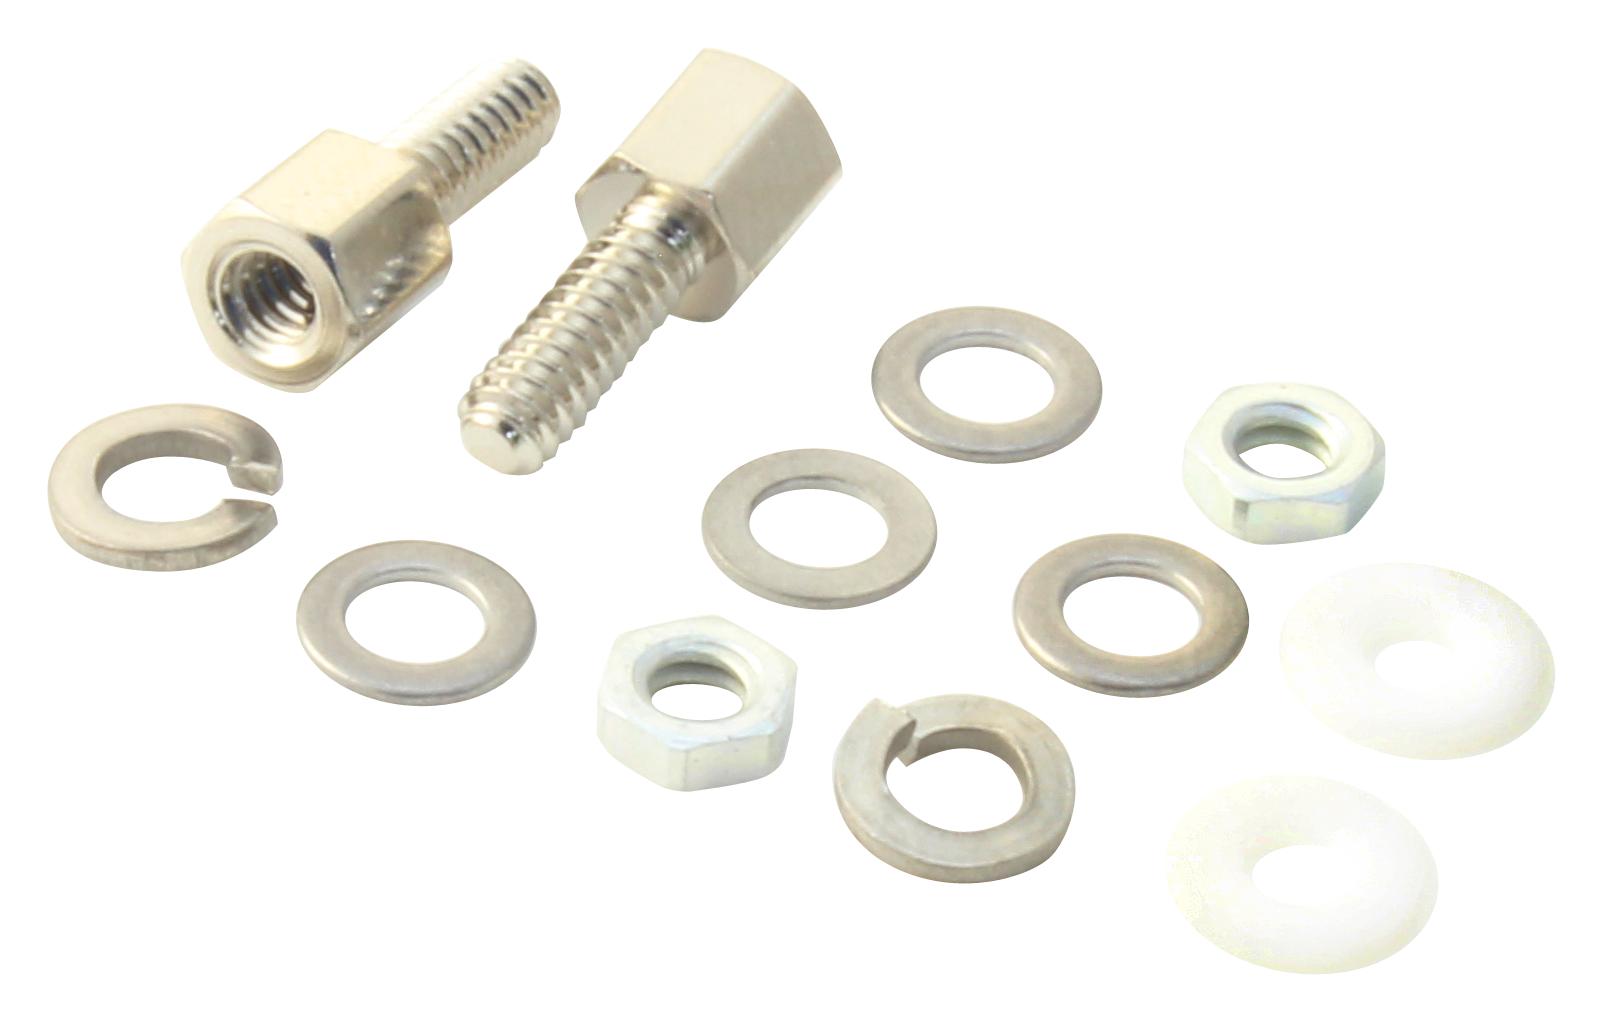 160-067-010R033 KIT, COMPLETE MOUNTING, 4-40UNC NORCOMP